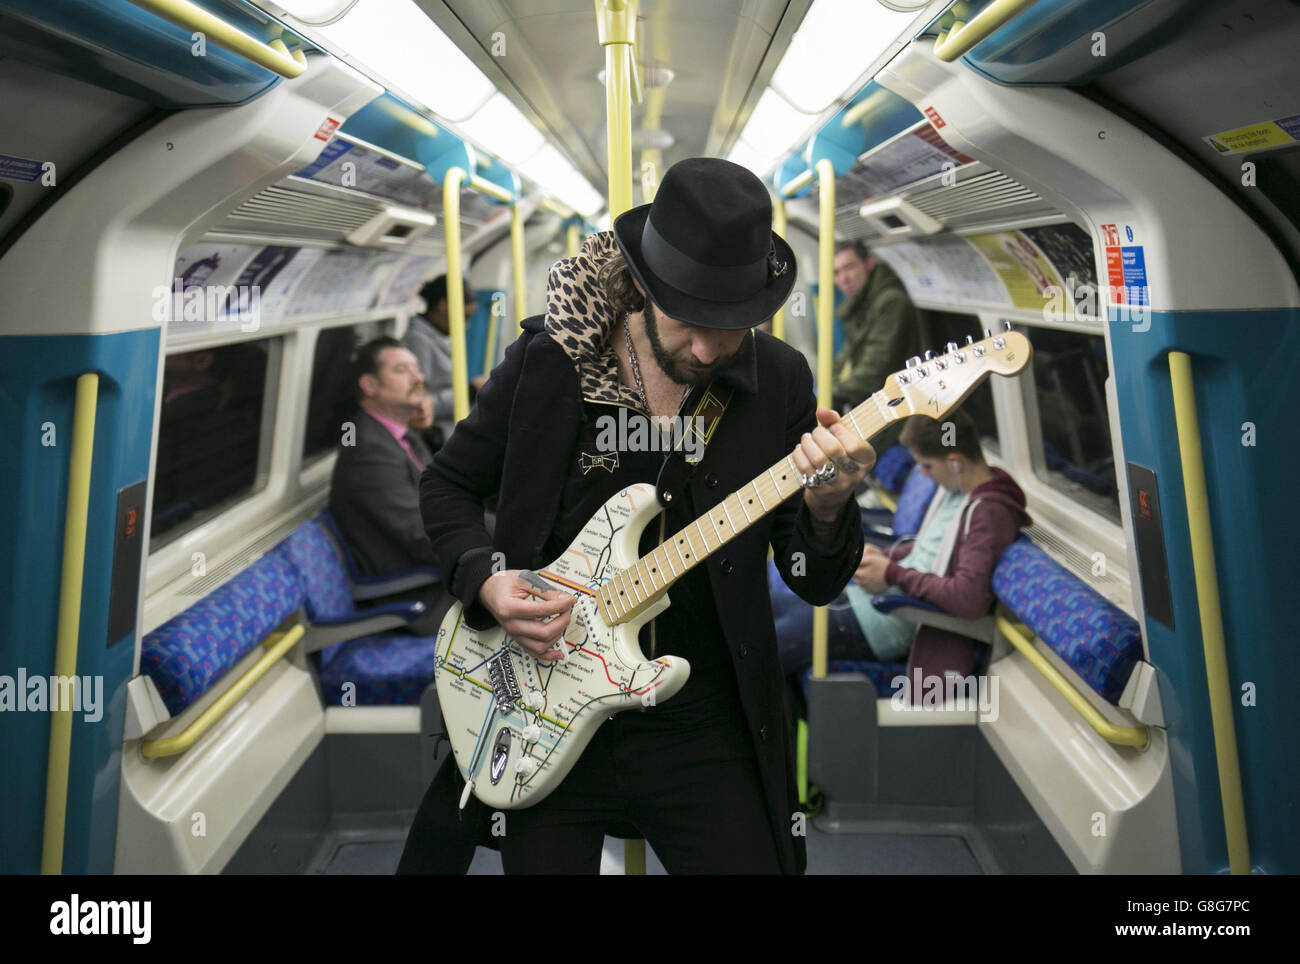 Musician James Black unveils a special edition Fender Stratocaster guitar illustrated with the London Underground map, to celebrate Transport for London and the London Transport Museum's Transported by Design programme. Stock Photo